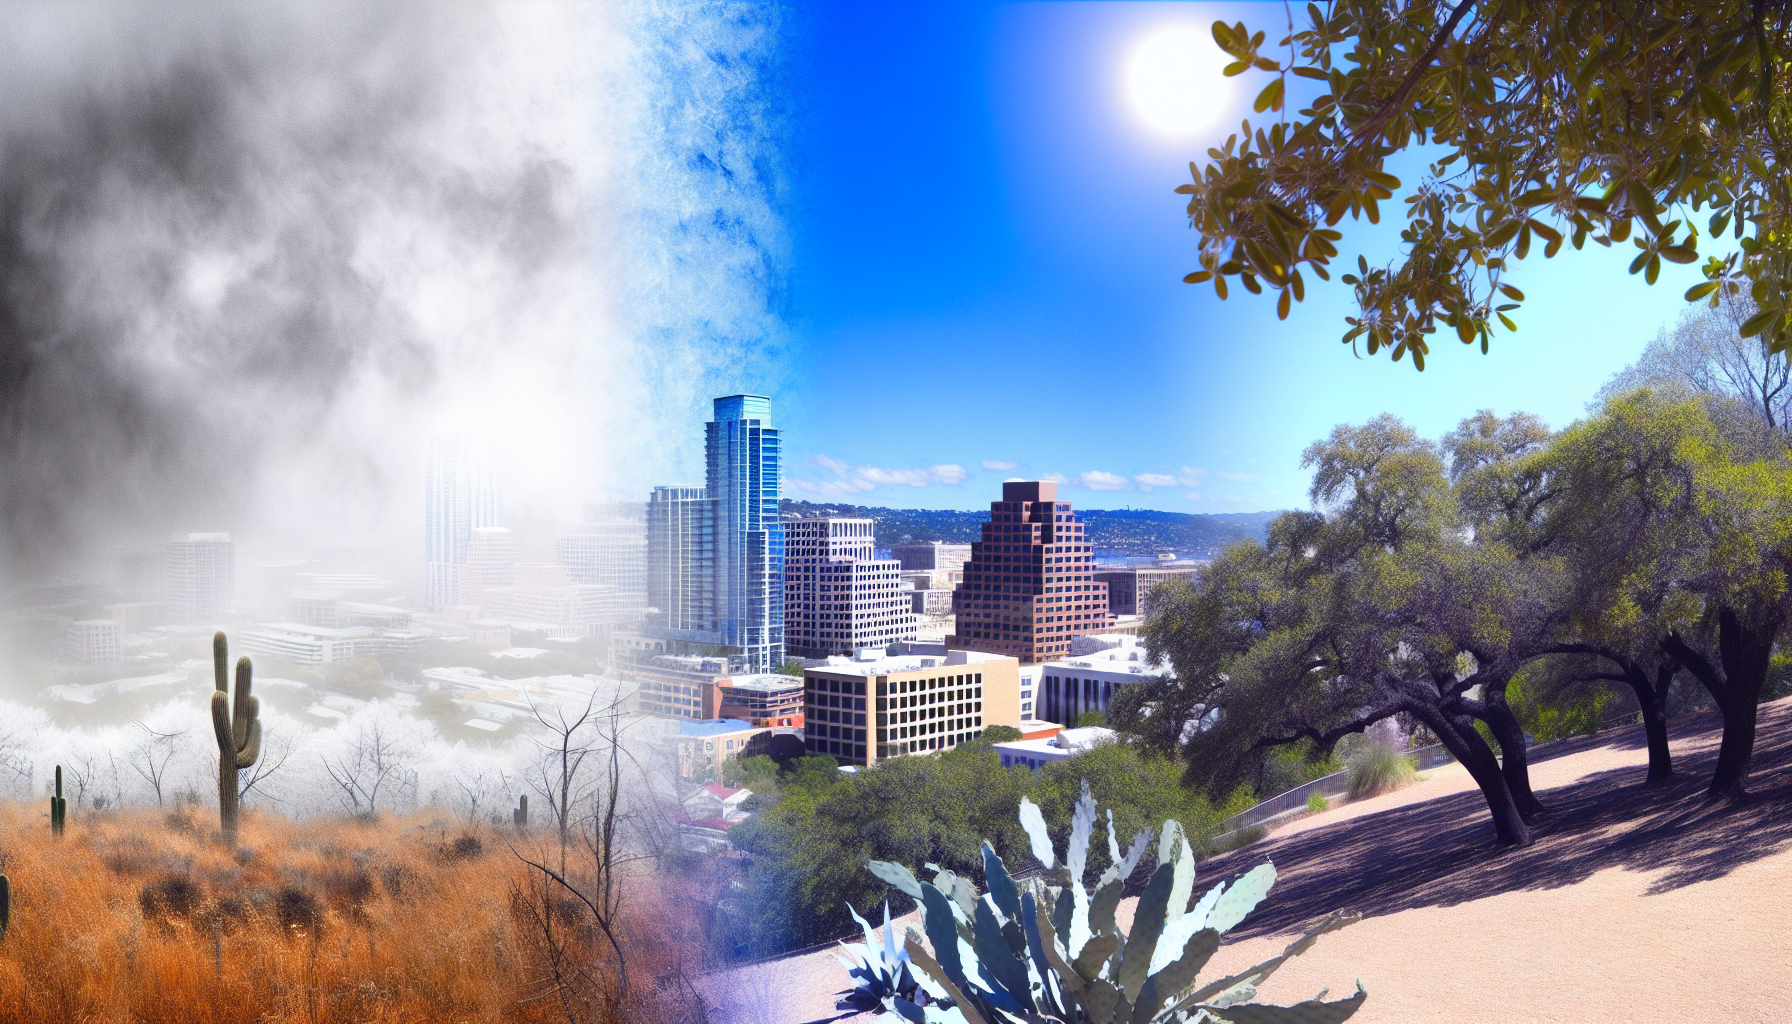 Contrast in climate and weather: Austin's hot summers vs Bay Area's cool, wet winters